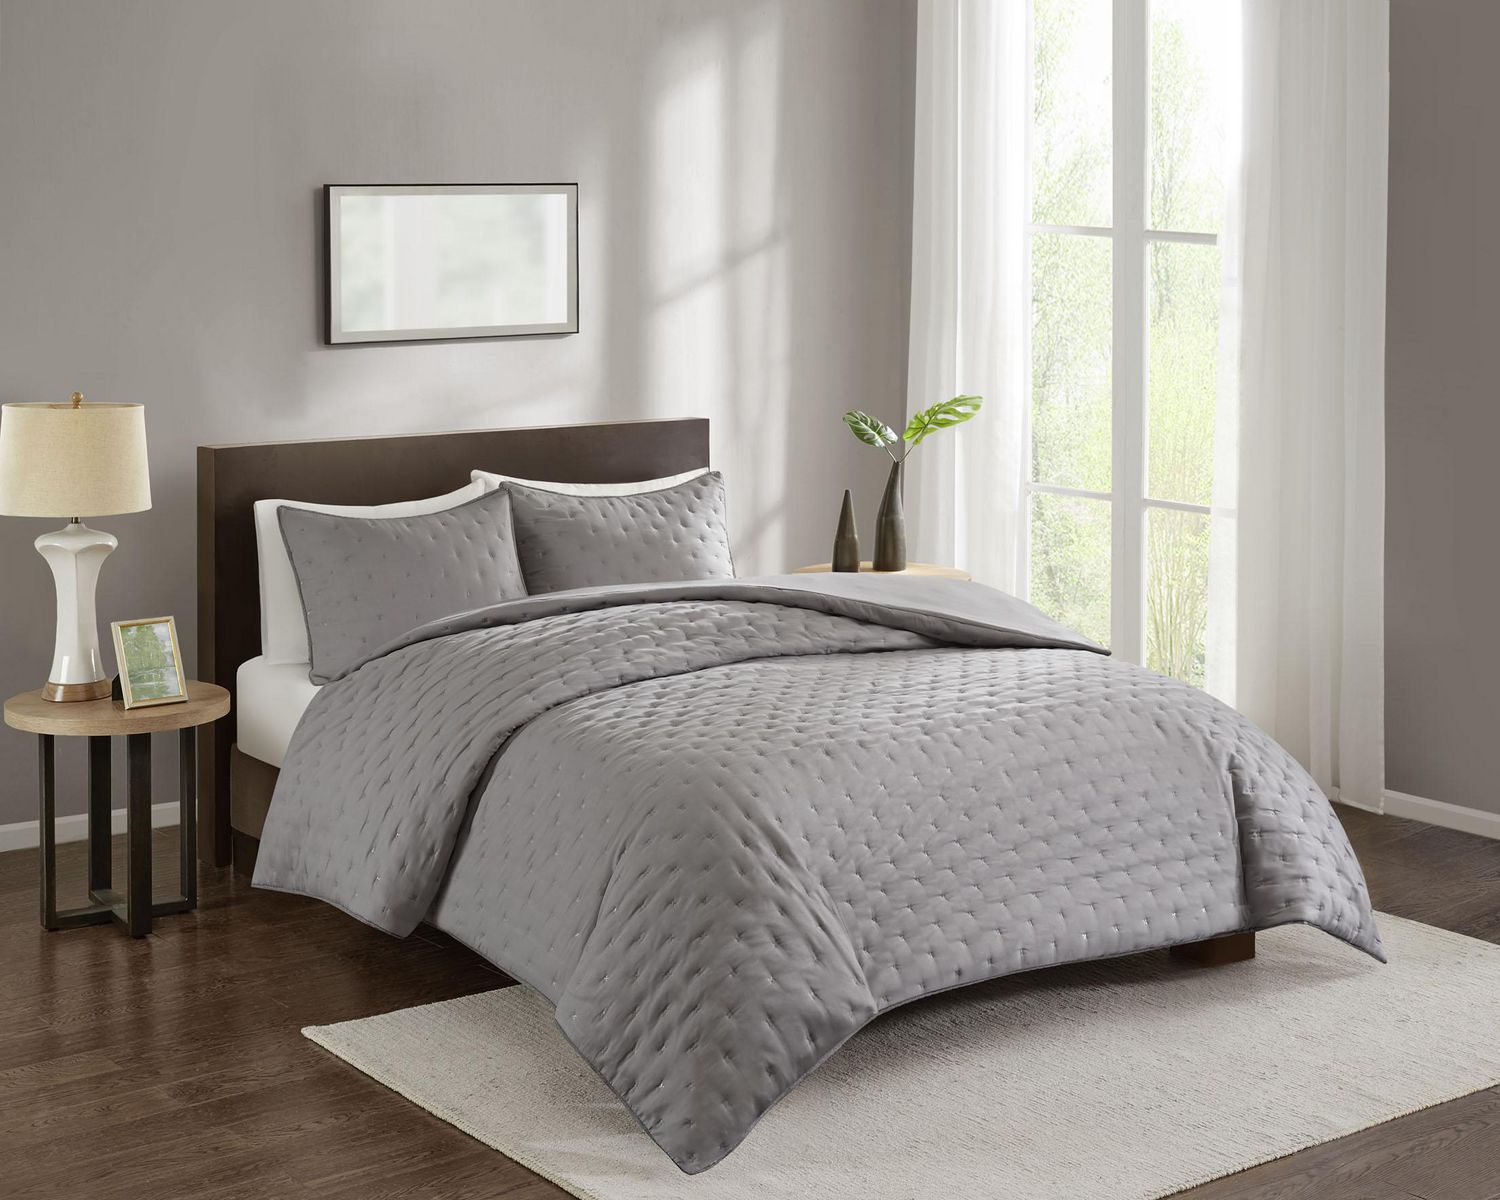 QUILTED DUVET COVER SET | Walmart Canada